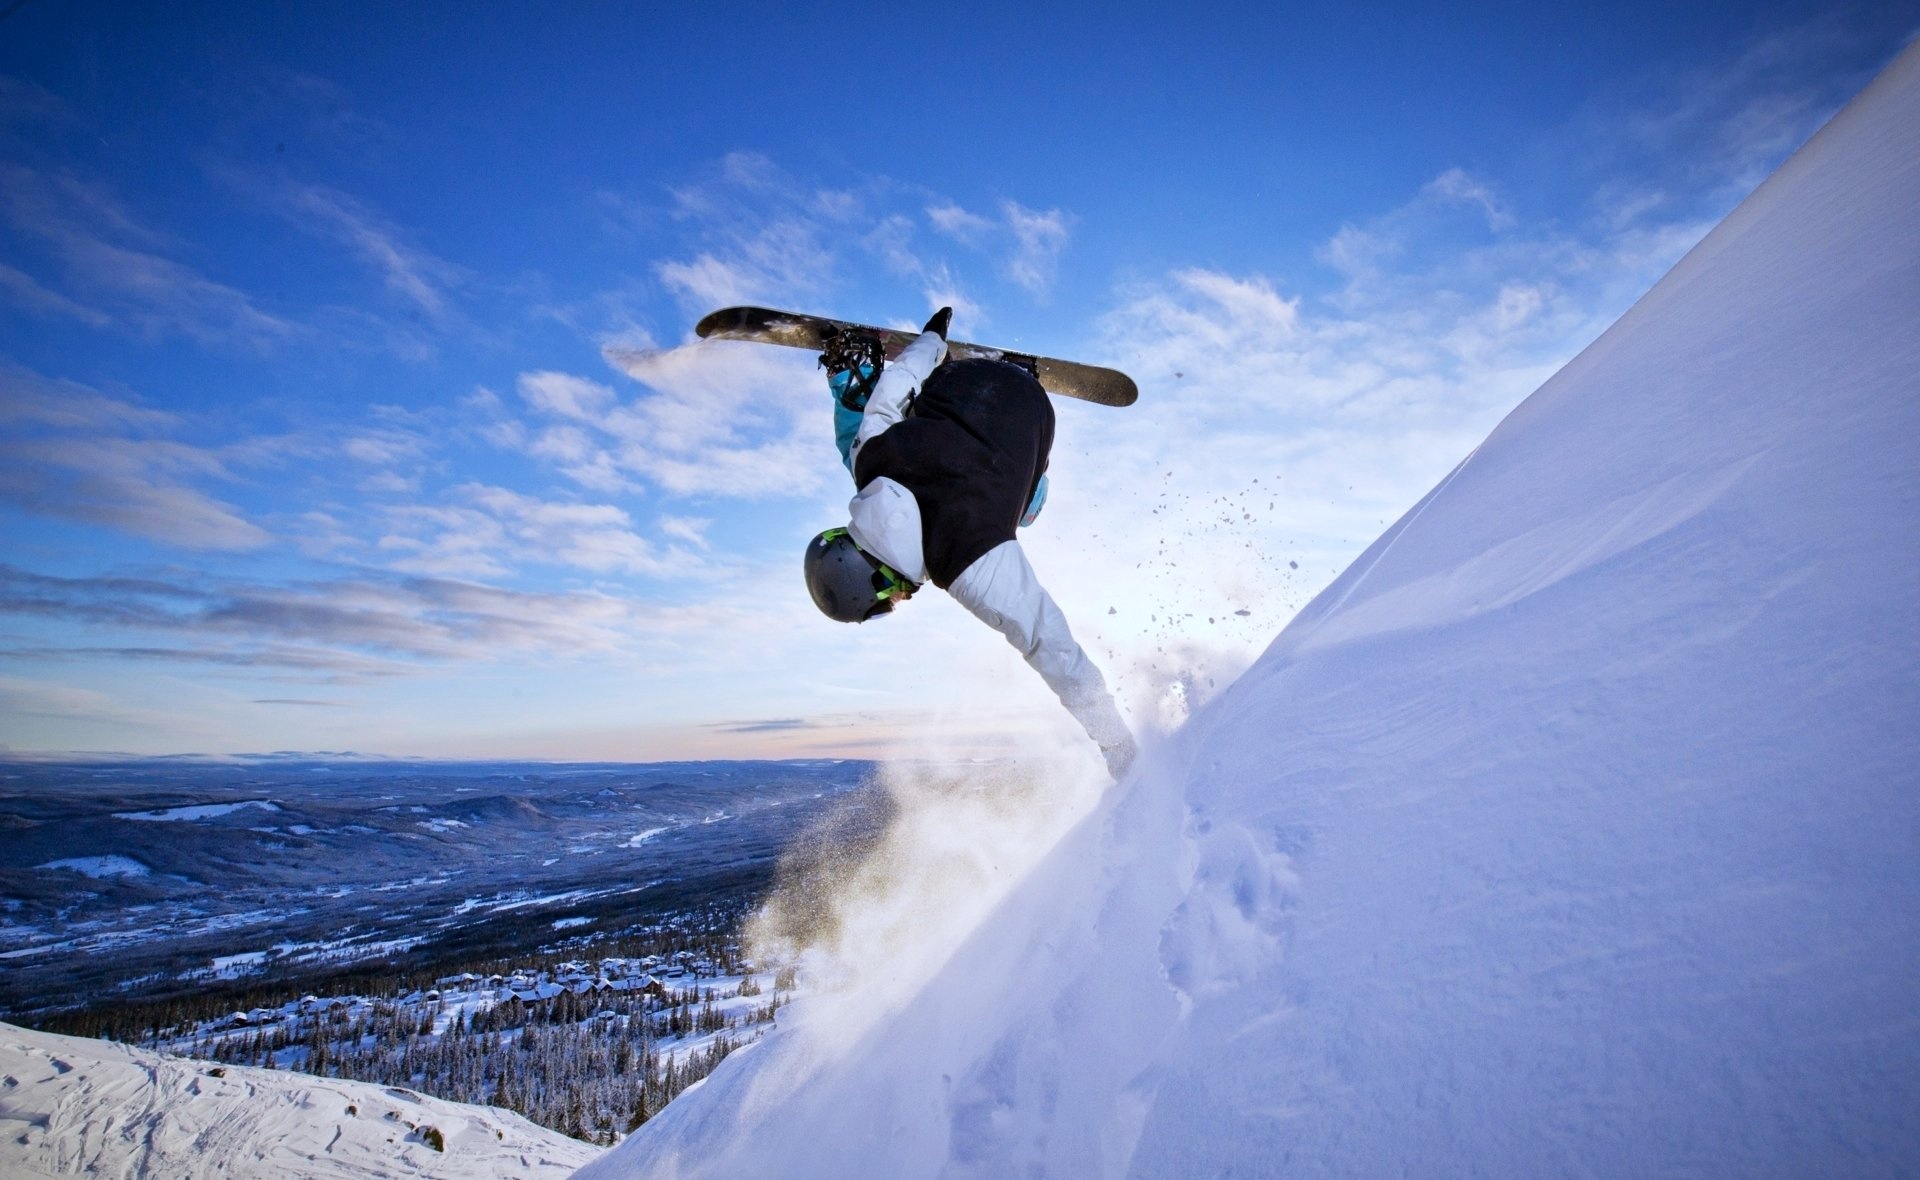 Snowboarding: Aerial acrobatics tricks in the mountains, Extreme snowboard riding, High-risk winter sport. 1920x1180 HD Background.